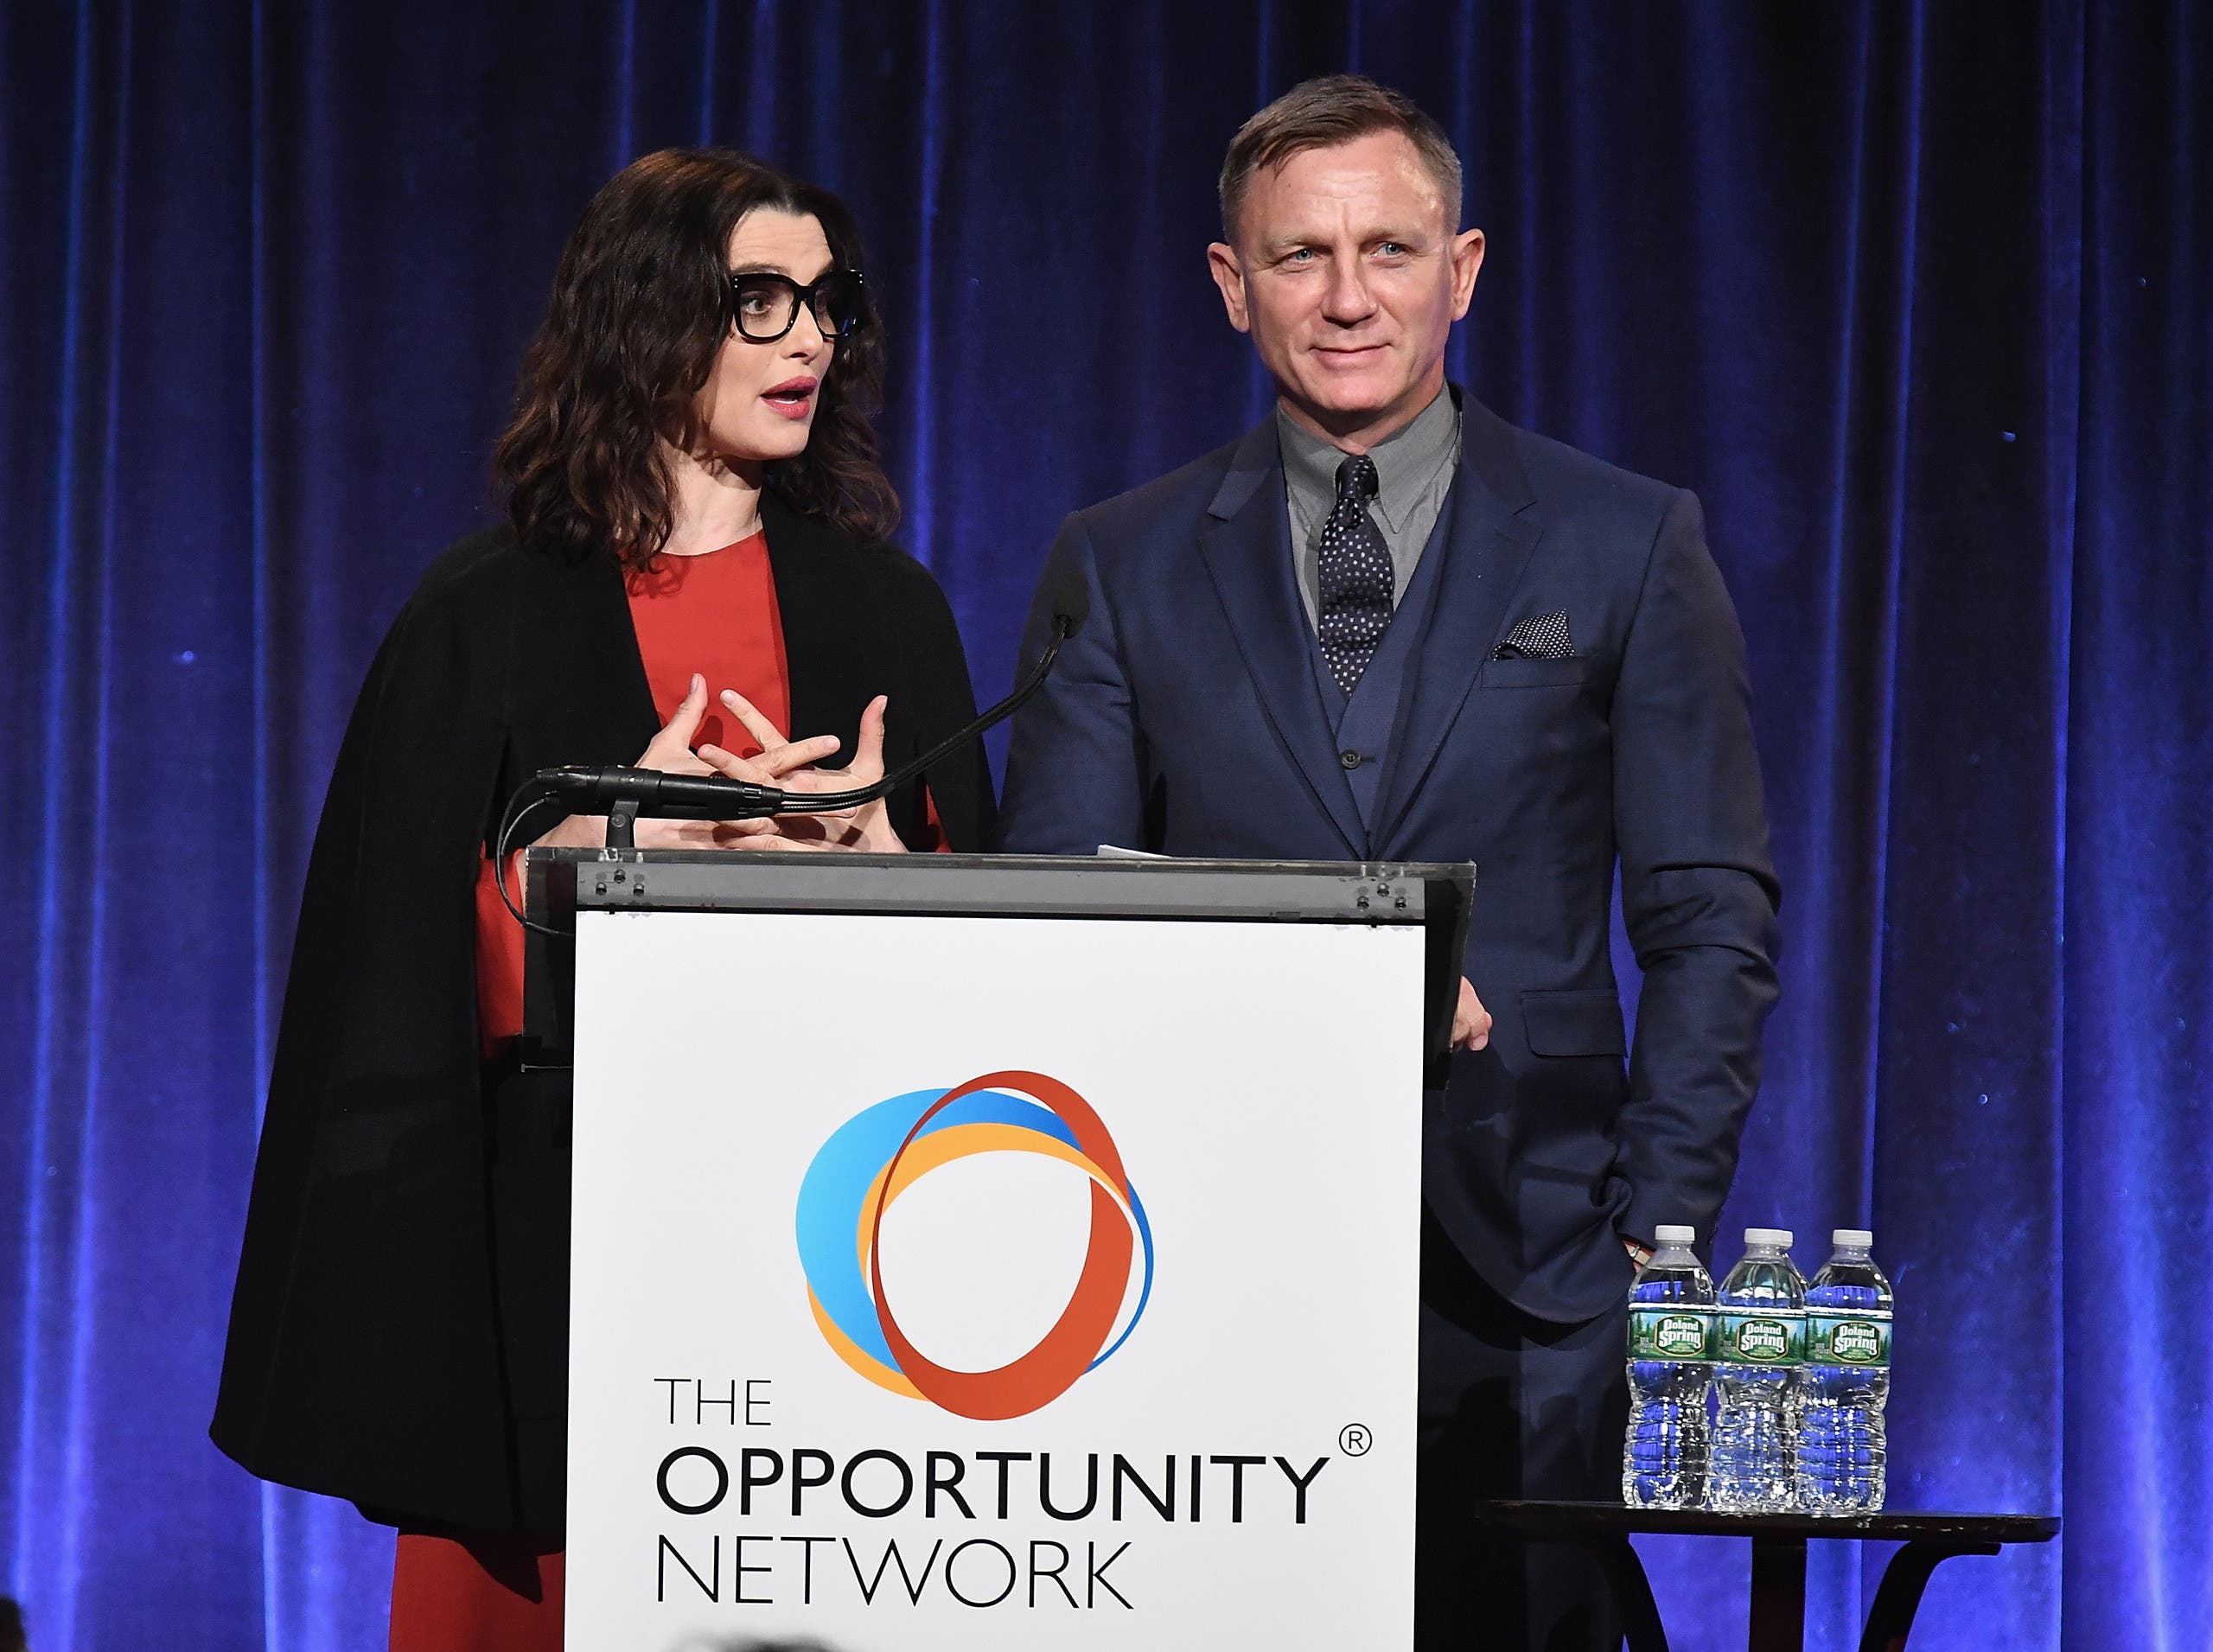 NEW YORK, NY - APRIL 09: Rachel Weisz and Daniel Craig attend The Opportunity Network's 11th Annual Night of Opportunity at Cipriani Wall Street on April 9, 2018 in New York City. Dimitrios Kambouris/Getty Images/AFP  Dimitrios Kambouris / GETTY IMAGES NORTH AMERICA / AFP